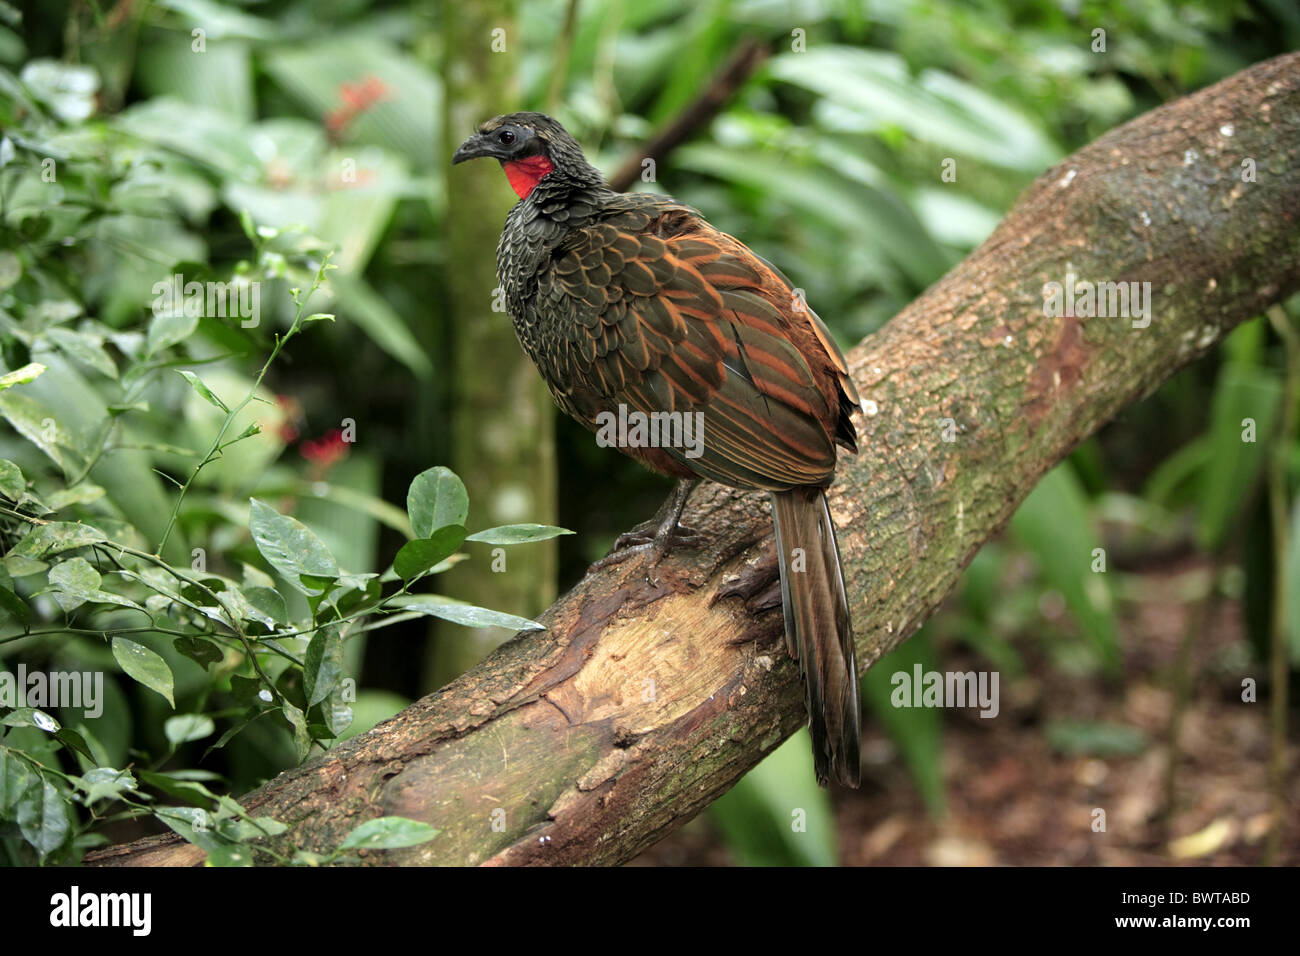 Rusty-margined Guan (Penelope superciliaris) adult, perched on branch, Pantanal, Mato Grosso, Brazil Stock Photo